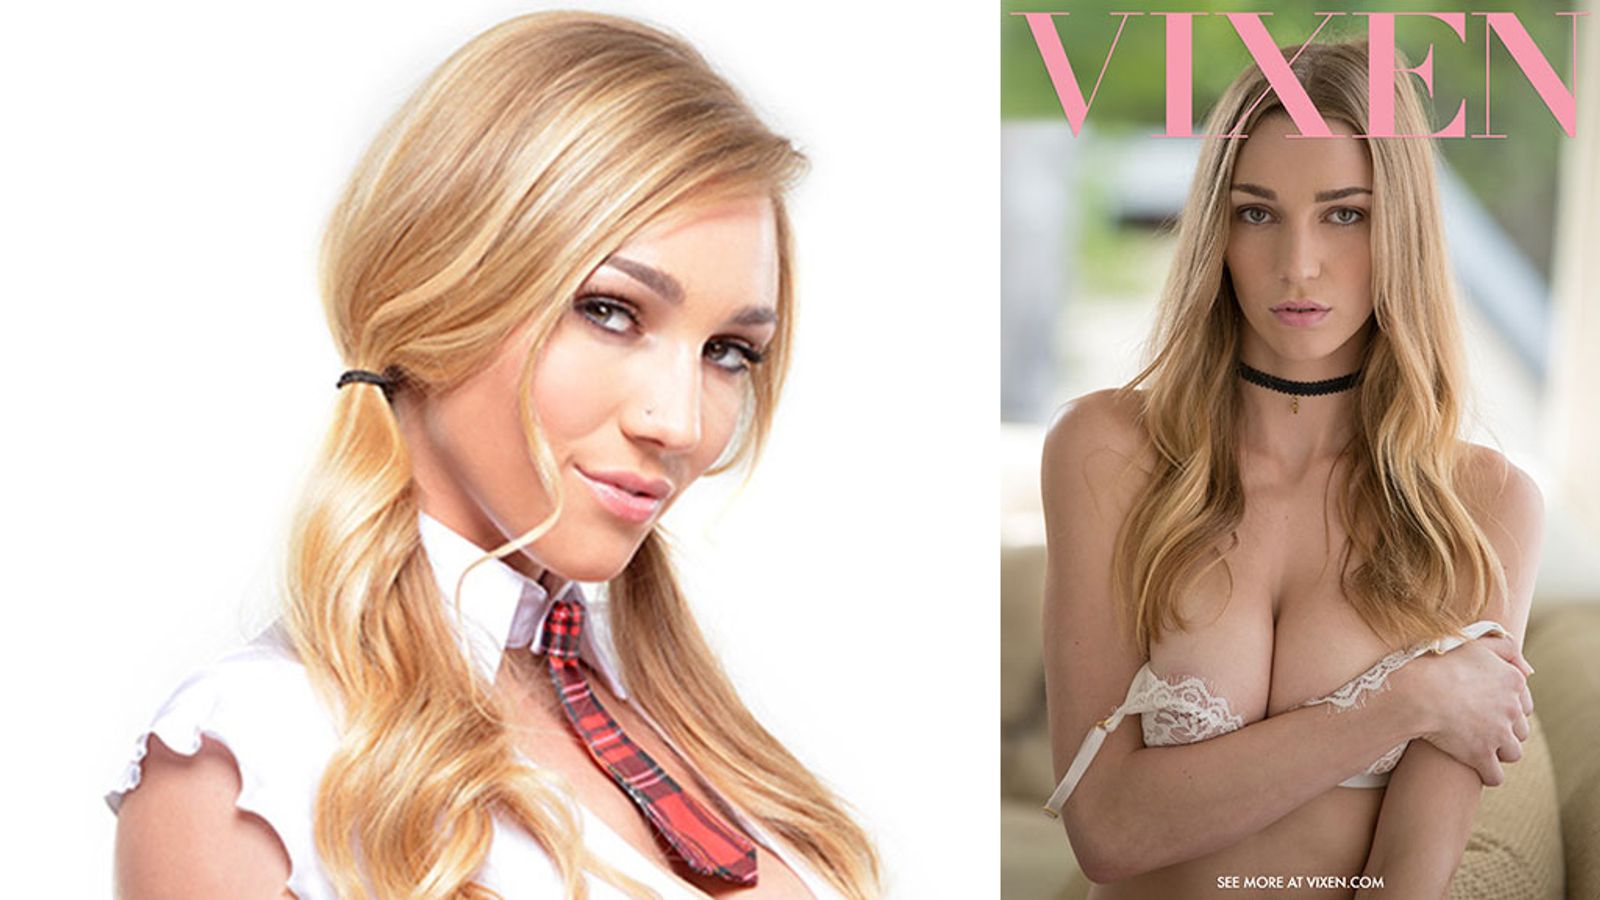 Kendra Sunderland Talks About Retirement In YNOT Interview